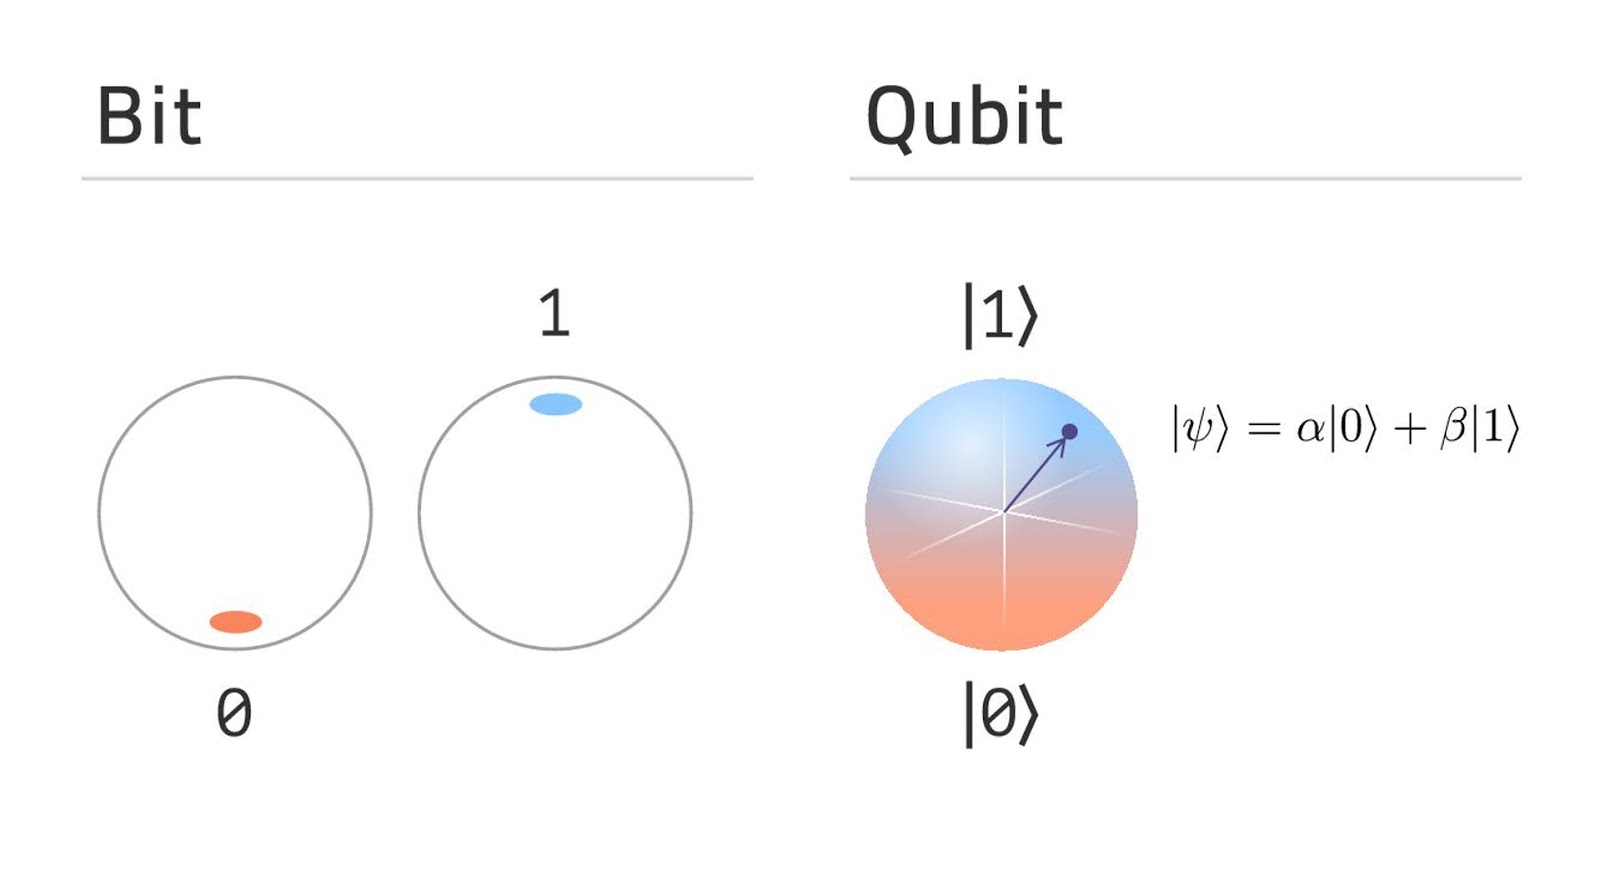 The difference between bit and qubit